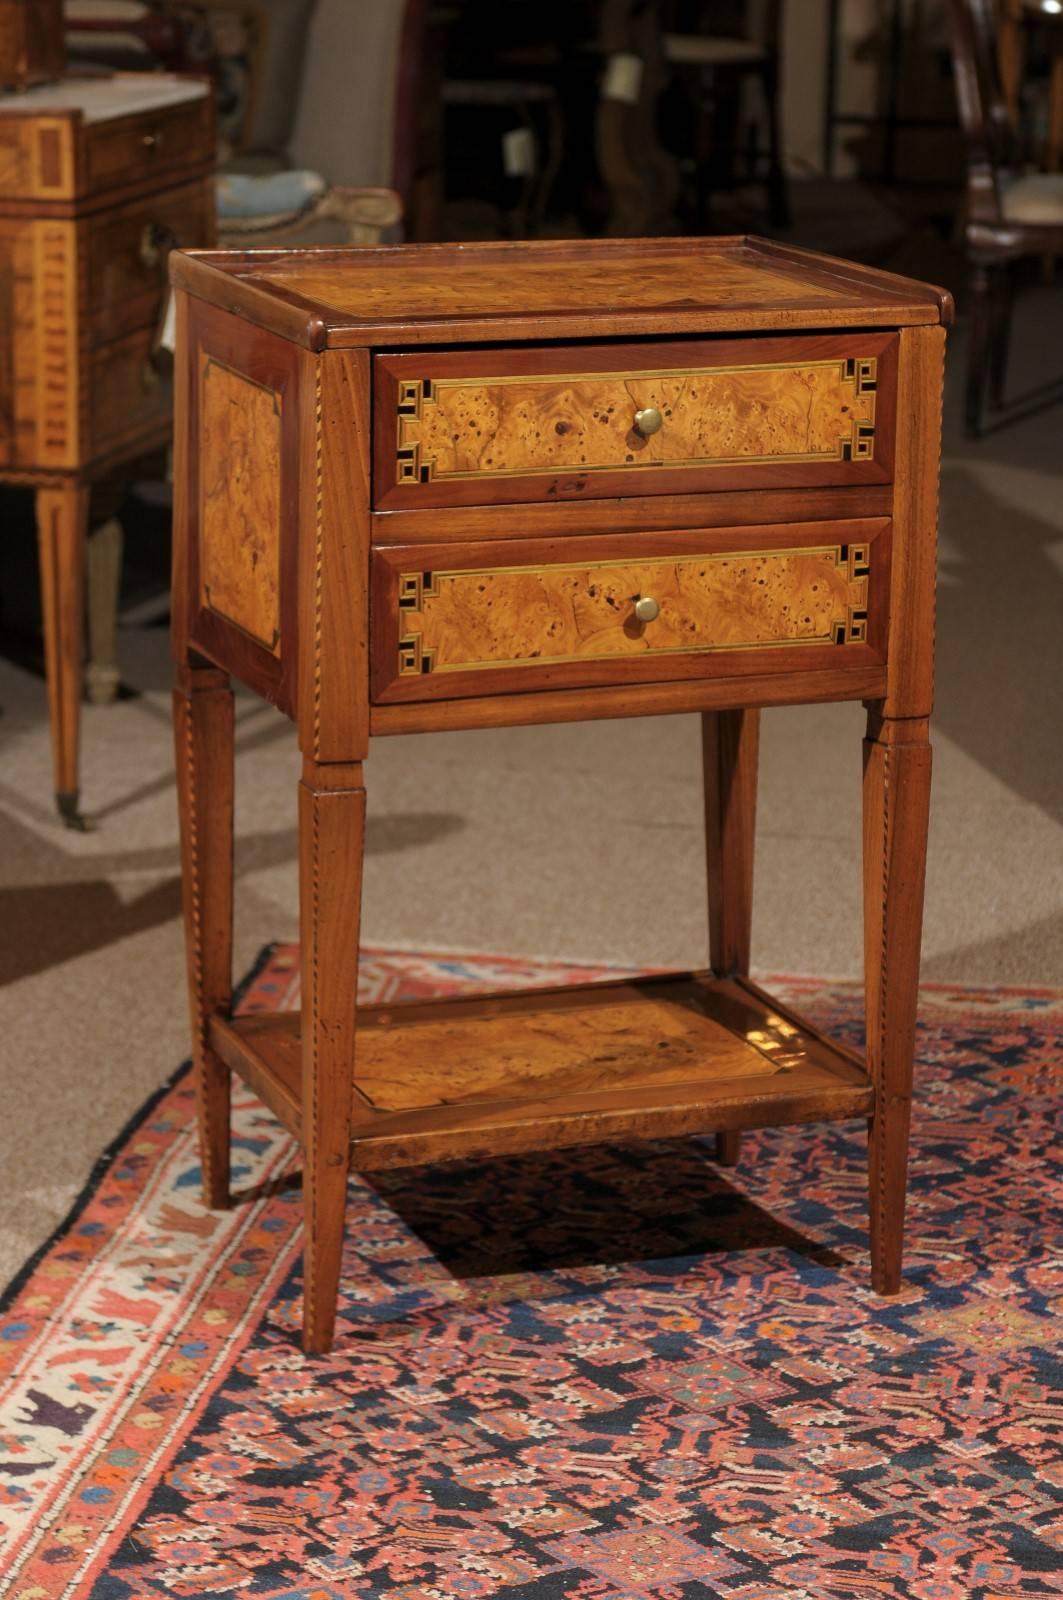 Late 18th century French two-drawer table in burled yew, walnut and fruitwood, circa 1790.